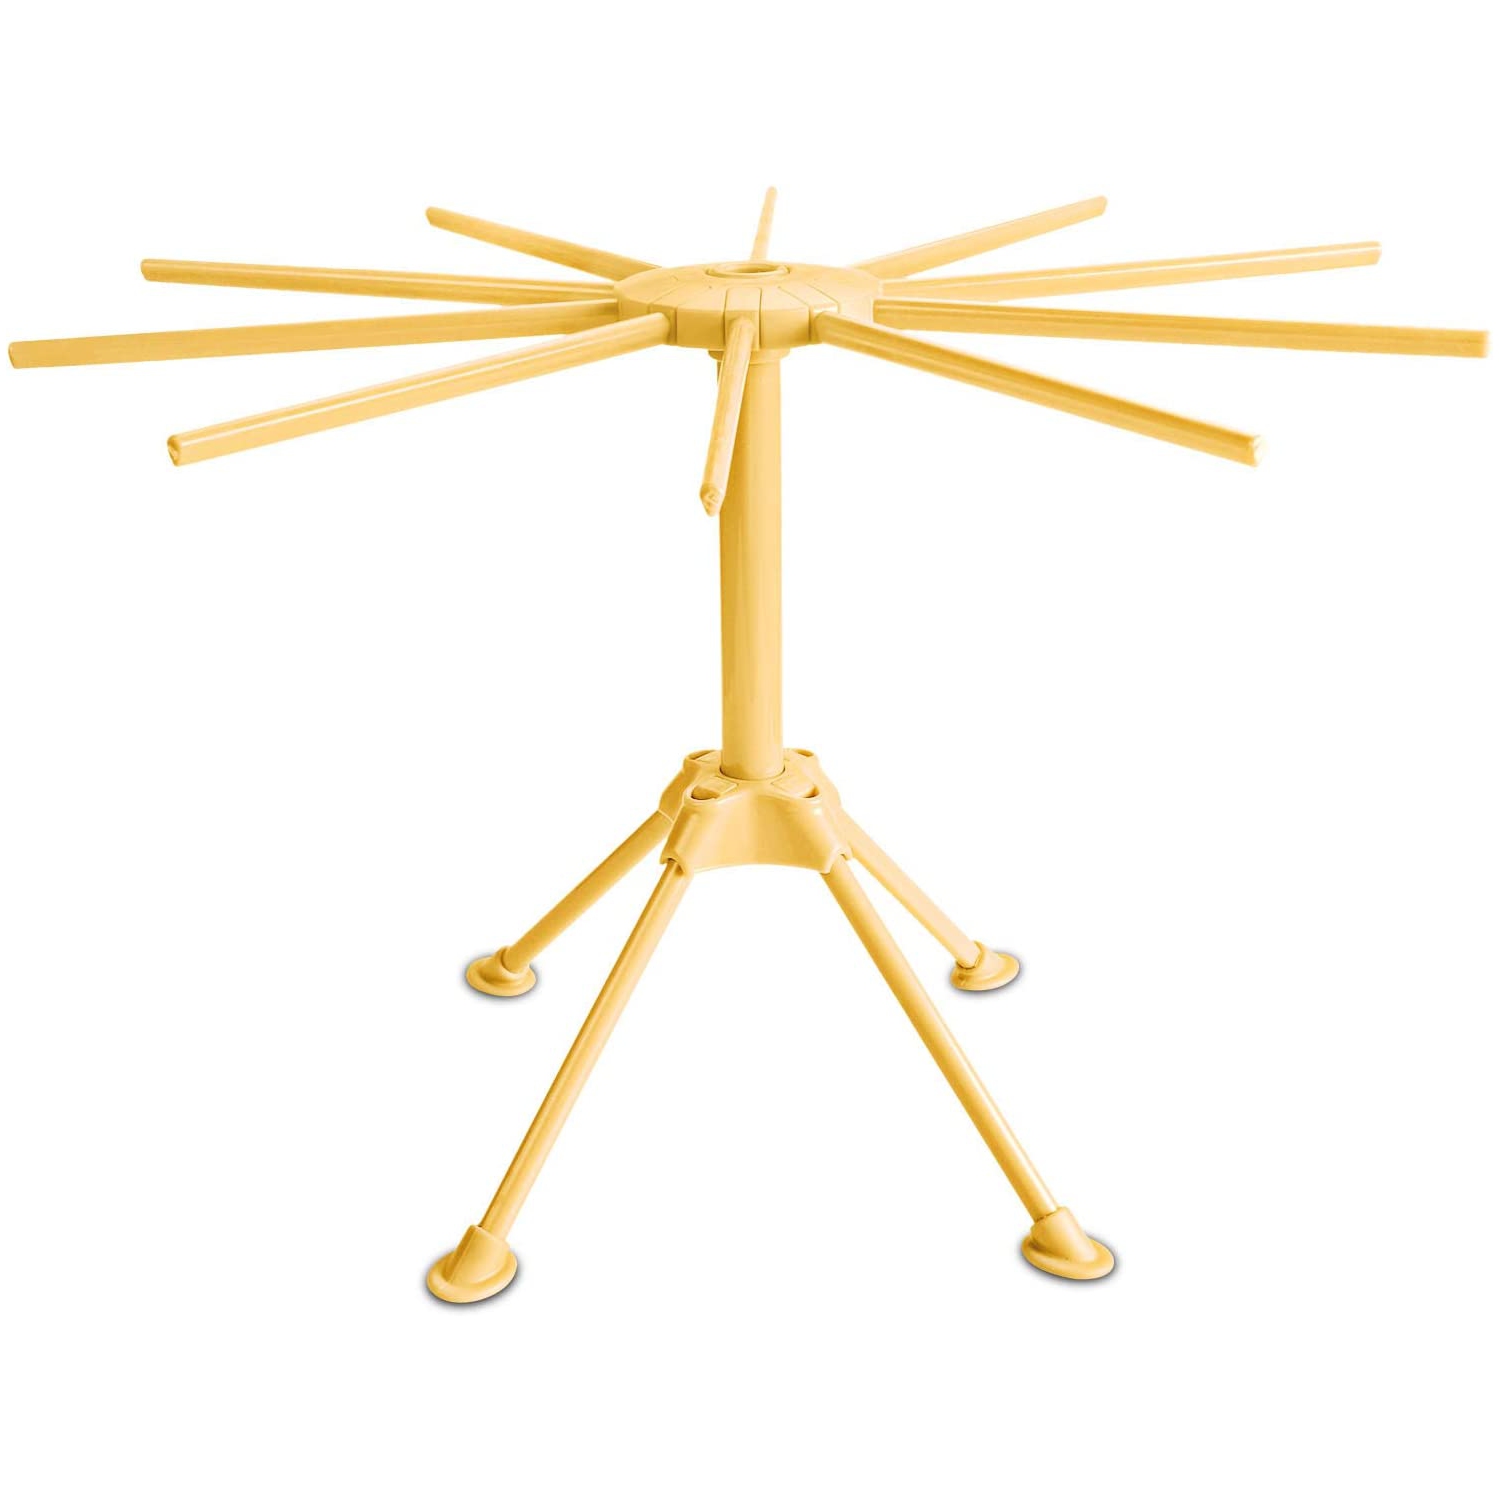 Pasta Drying Rack Collapsible,Fresh Noodles Hanging Stander,Household Pasta Drying Tool for Kitchen,Foldable Plastic